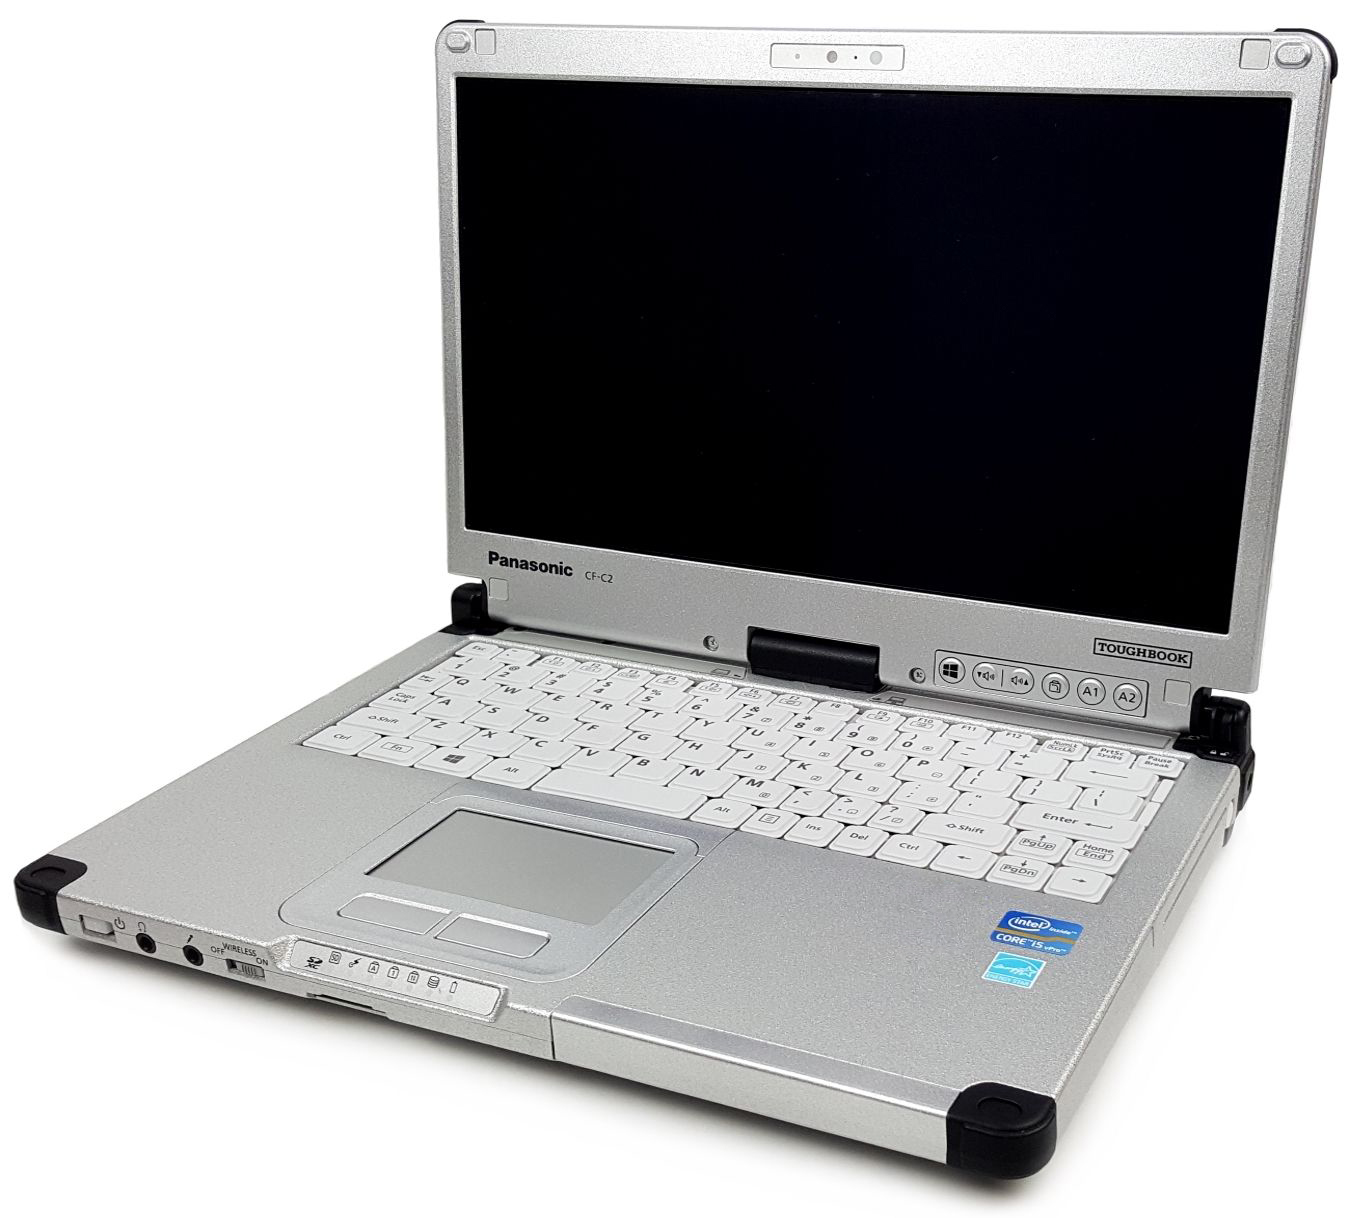 Panasonic - TOUGHBOOK CF-C2 - 12.5" Intel Core i5-4300U 1.9GHz / 8GB RAM / 128G SSD/ WIN8 - USED with FREE 3 Year Warranty provided by CPS. - image 1 of 2